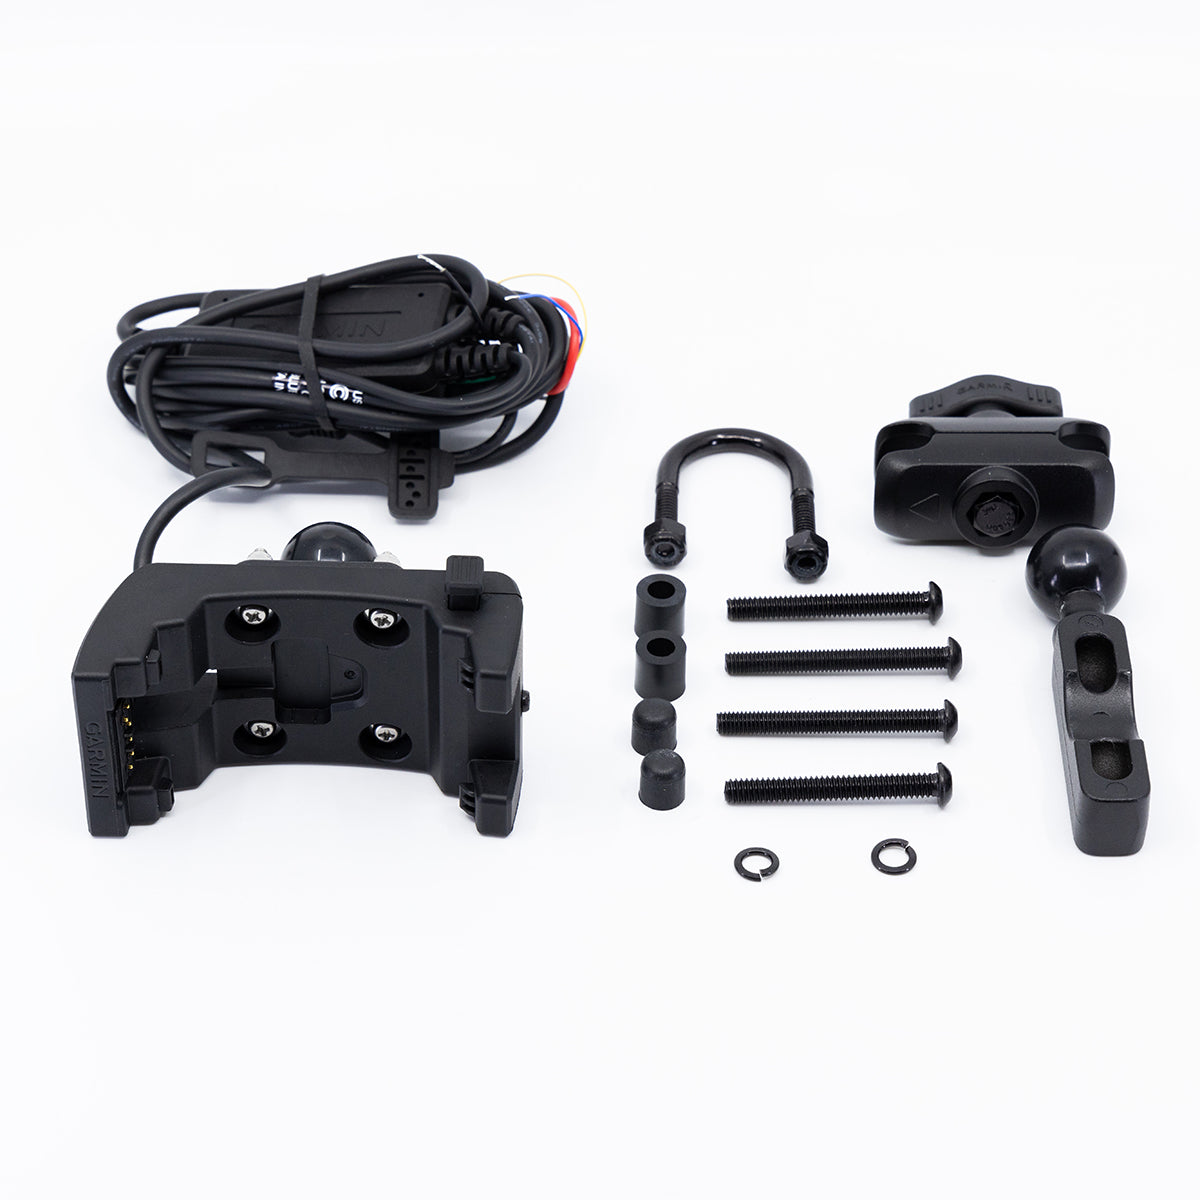 Garmin Motorcycle Mount Kit and Cables